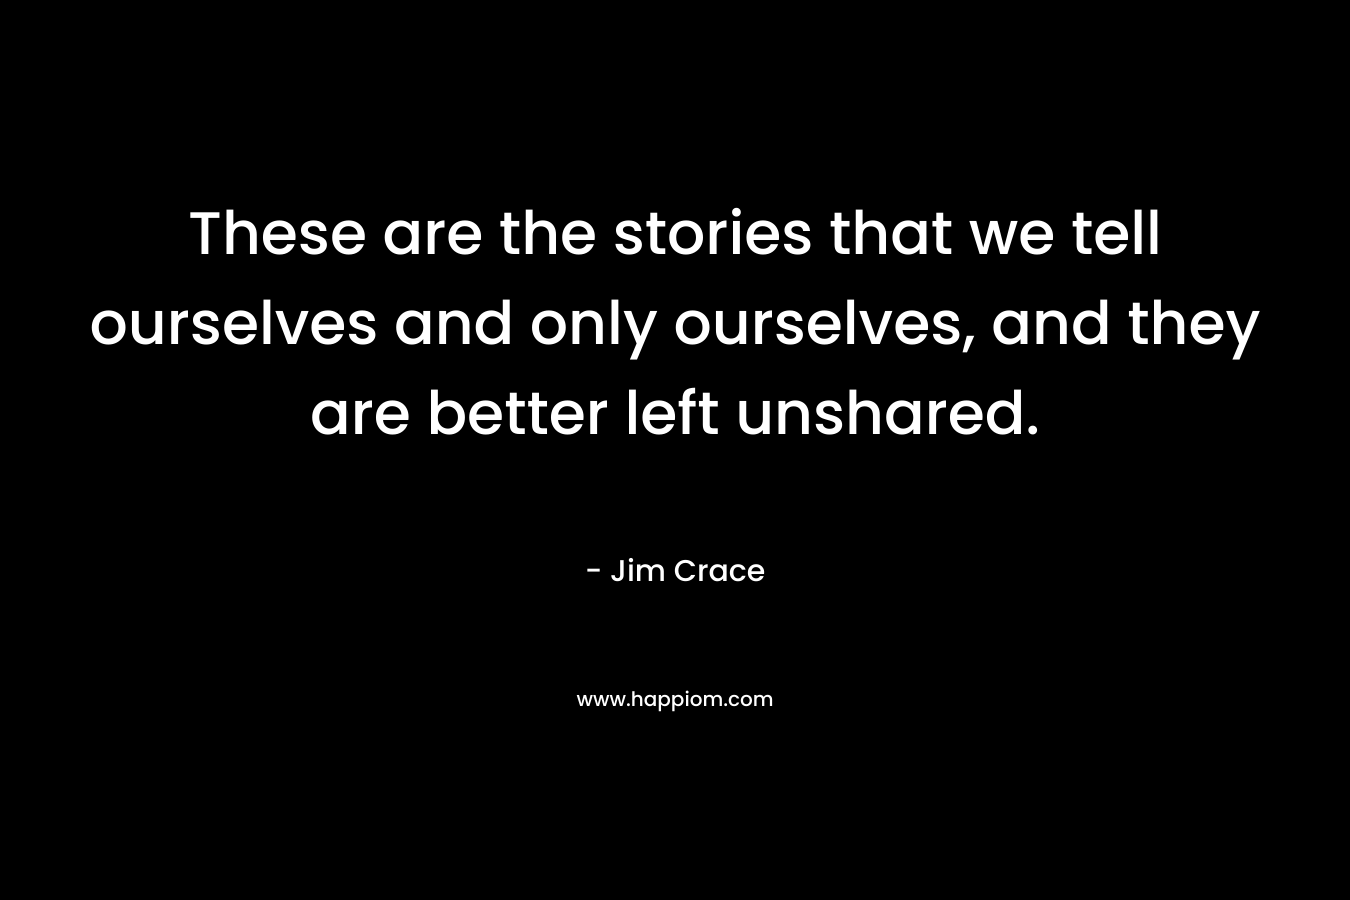 These are the stories that we tell ourselves and only ourselves, and they are better left unshared. – Jim Crace